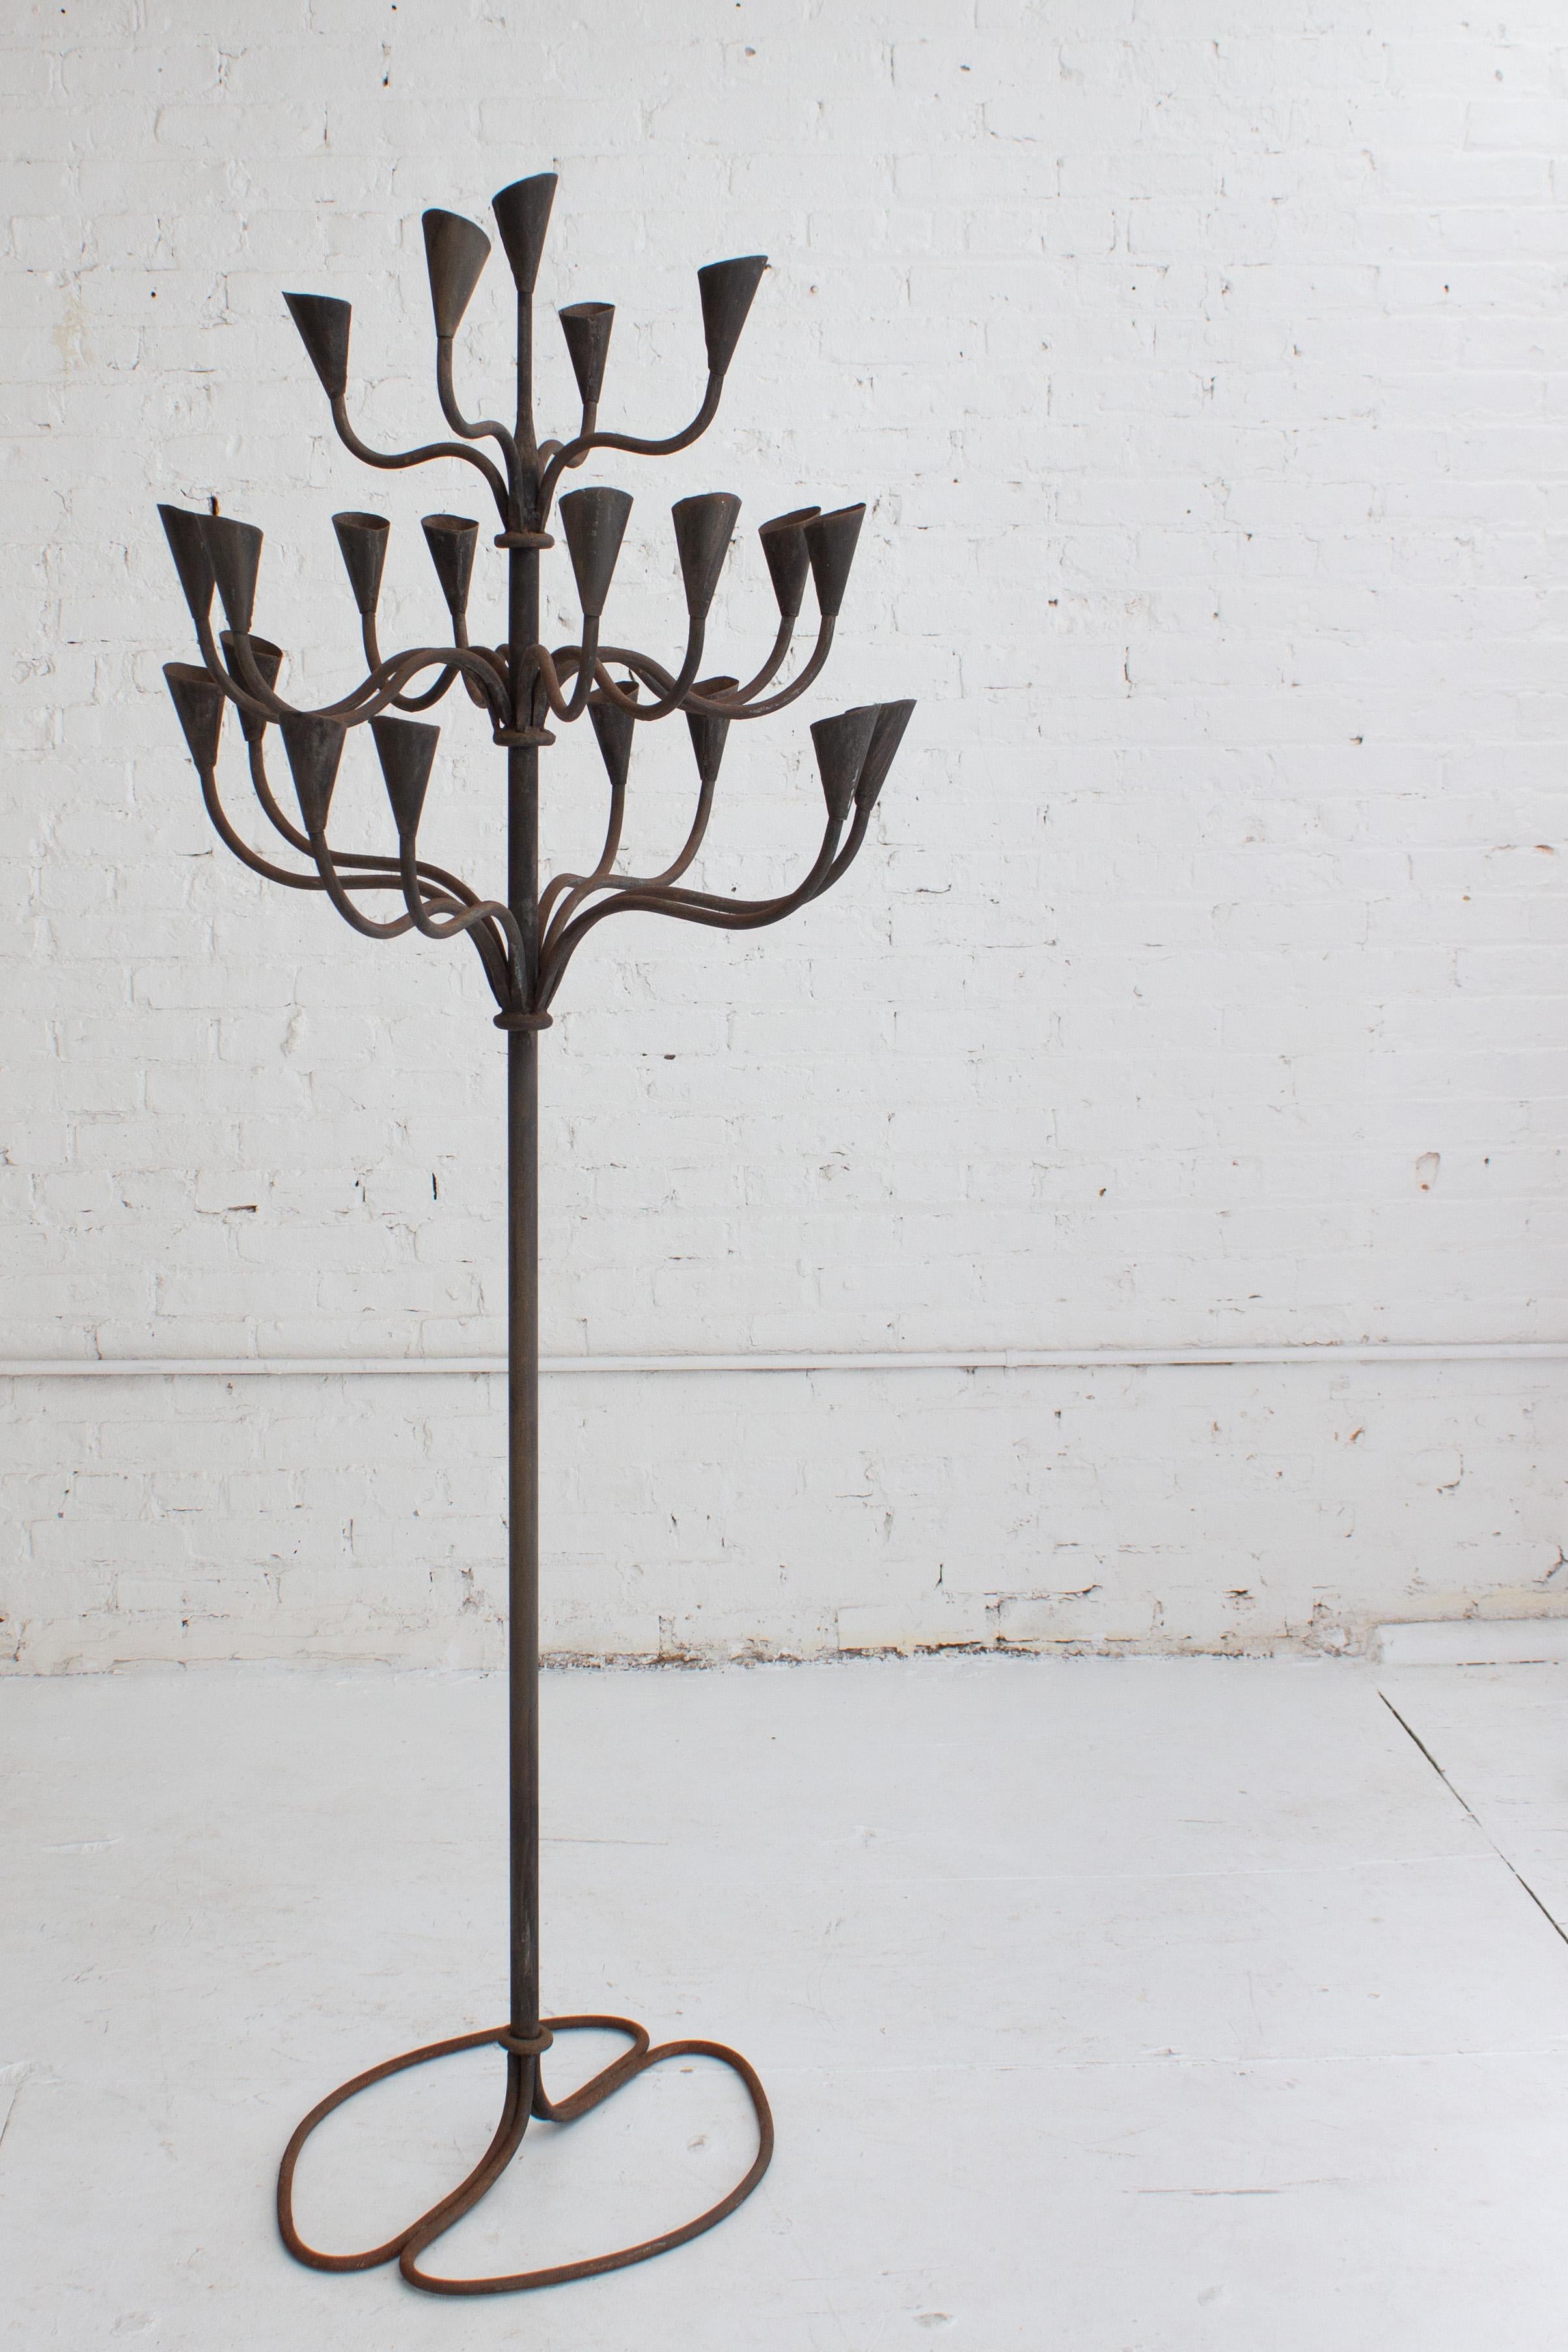 A handcrafted iron candelabra. Impressive in height scale the candelabra features 21 inserts for tapers of varying sizes. Weld marks and variations show the artists hand.